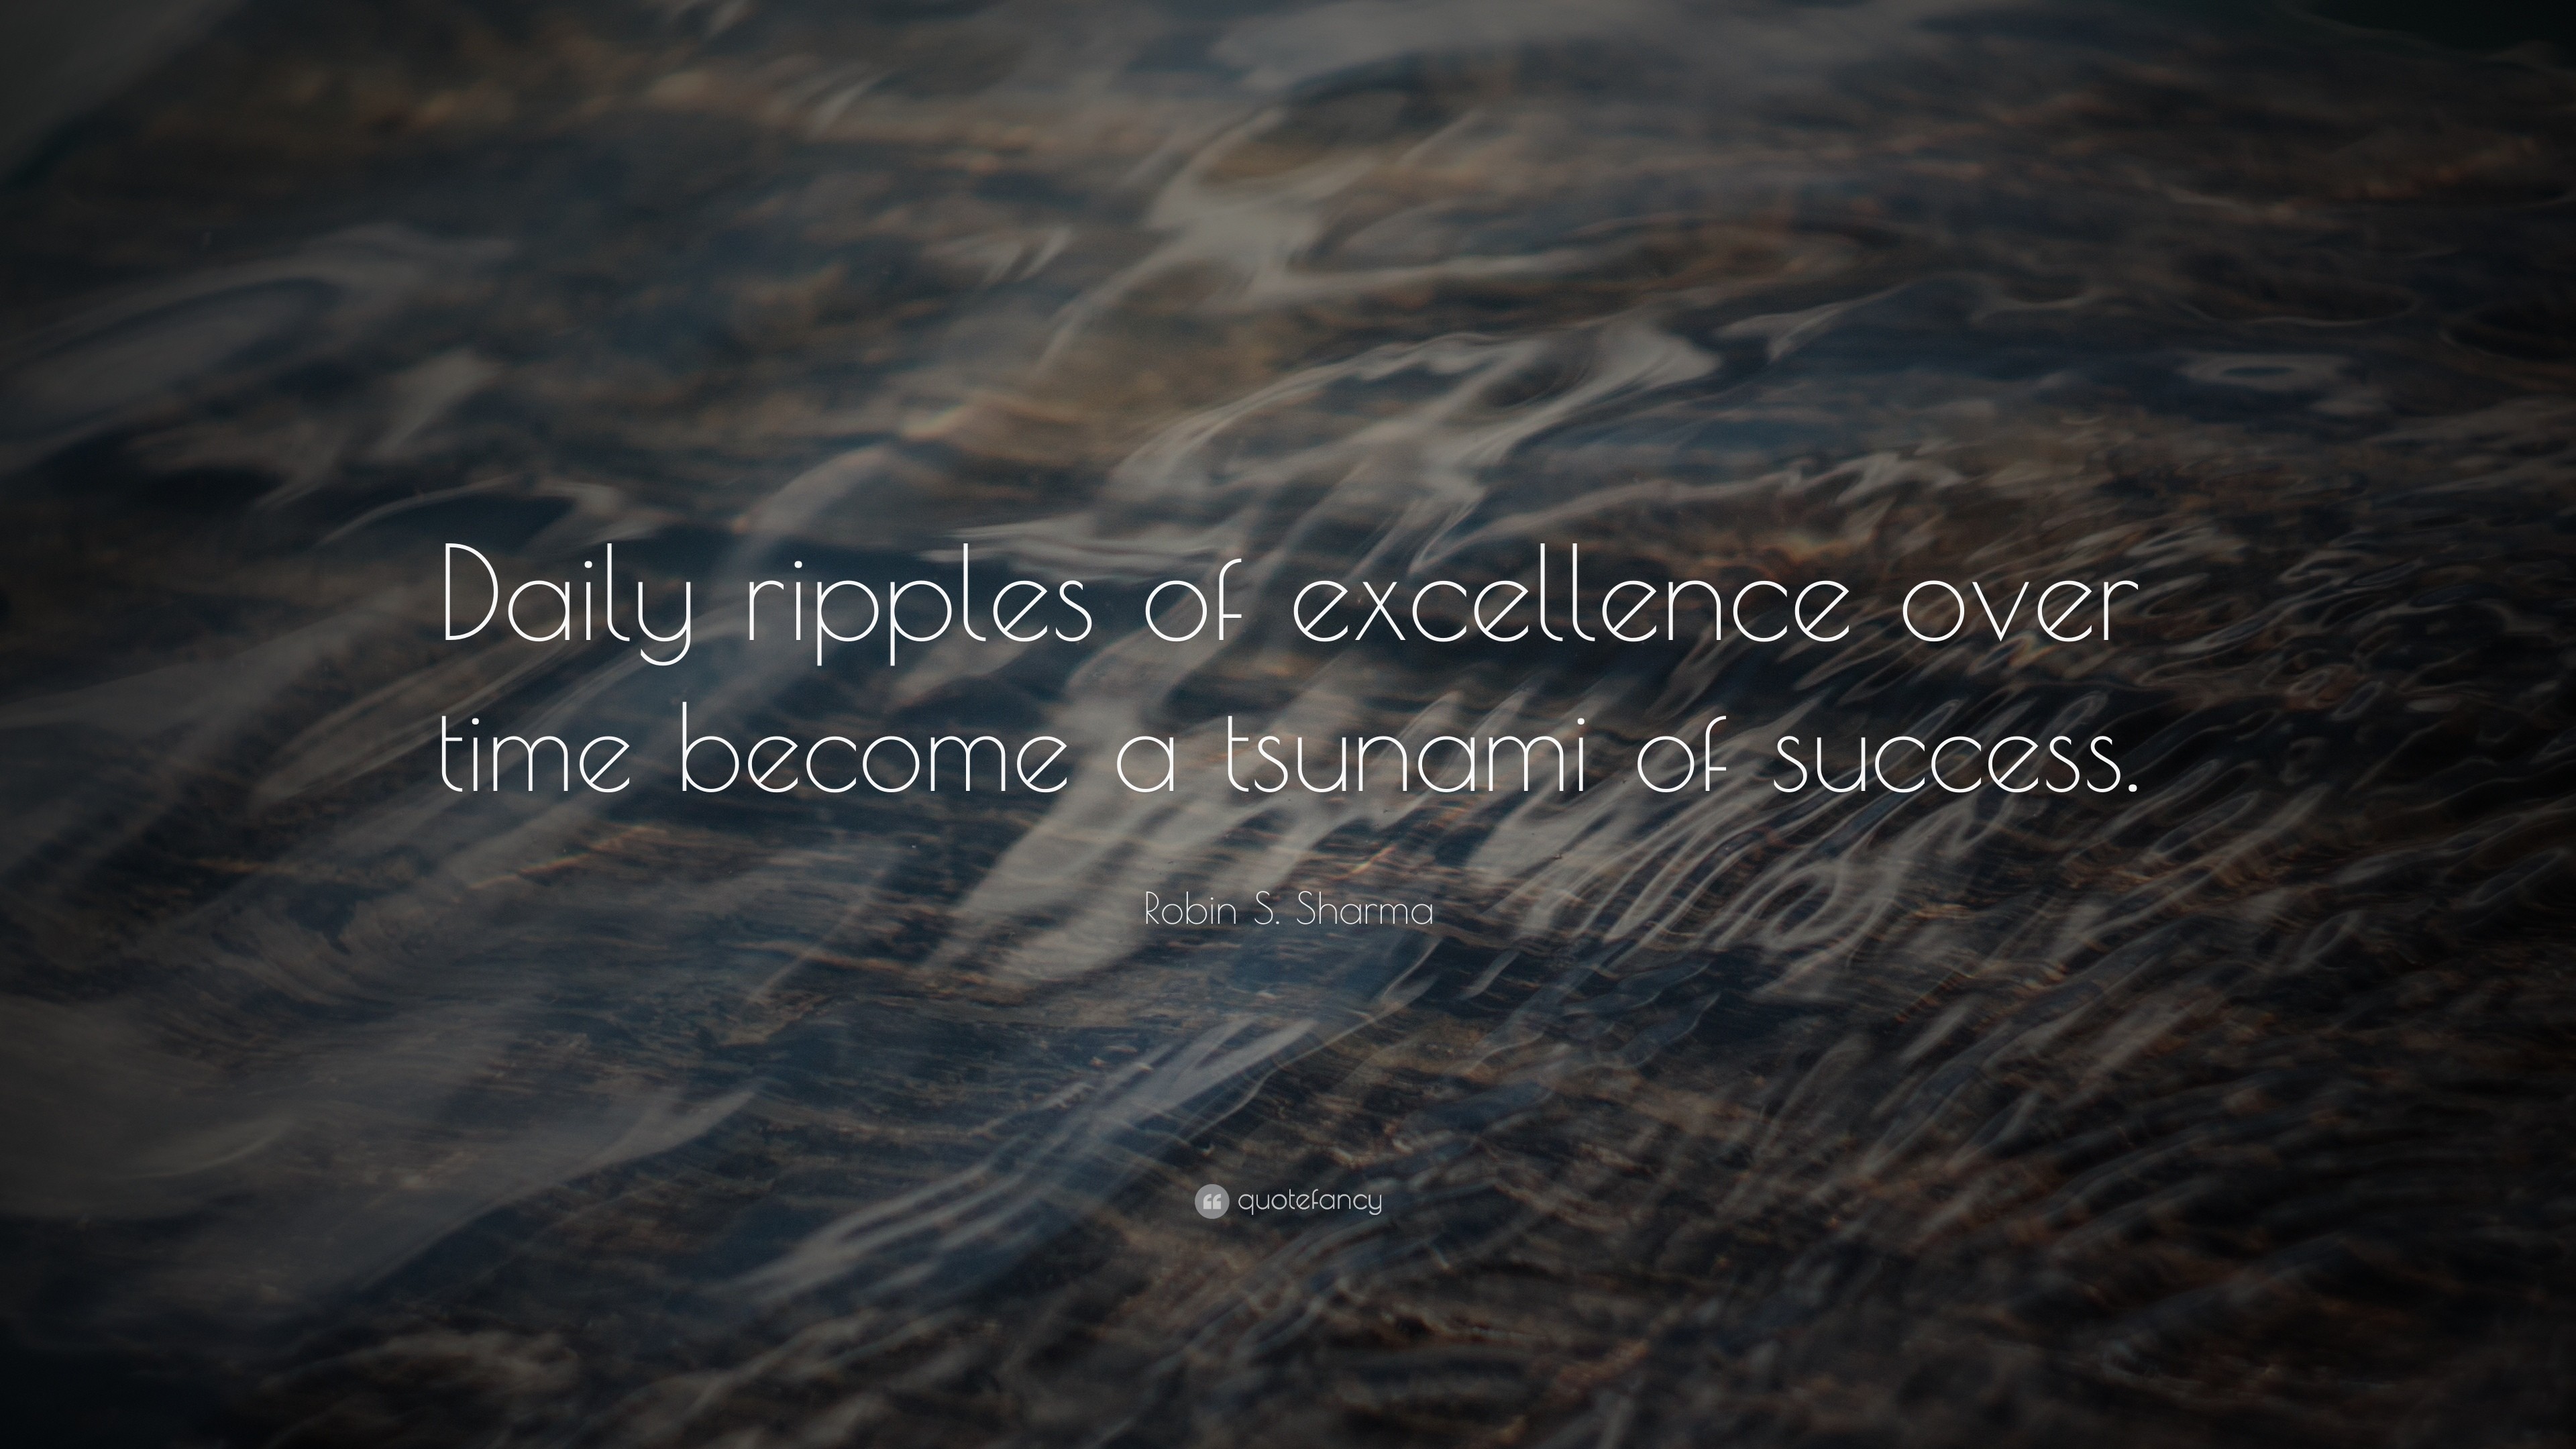 3840x2160 Robin S. Sharma Quote: “Daily ripples of excellence over time become a  tsunami